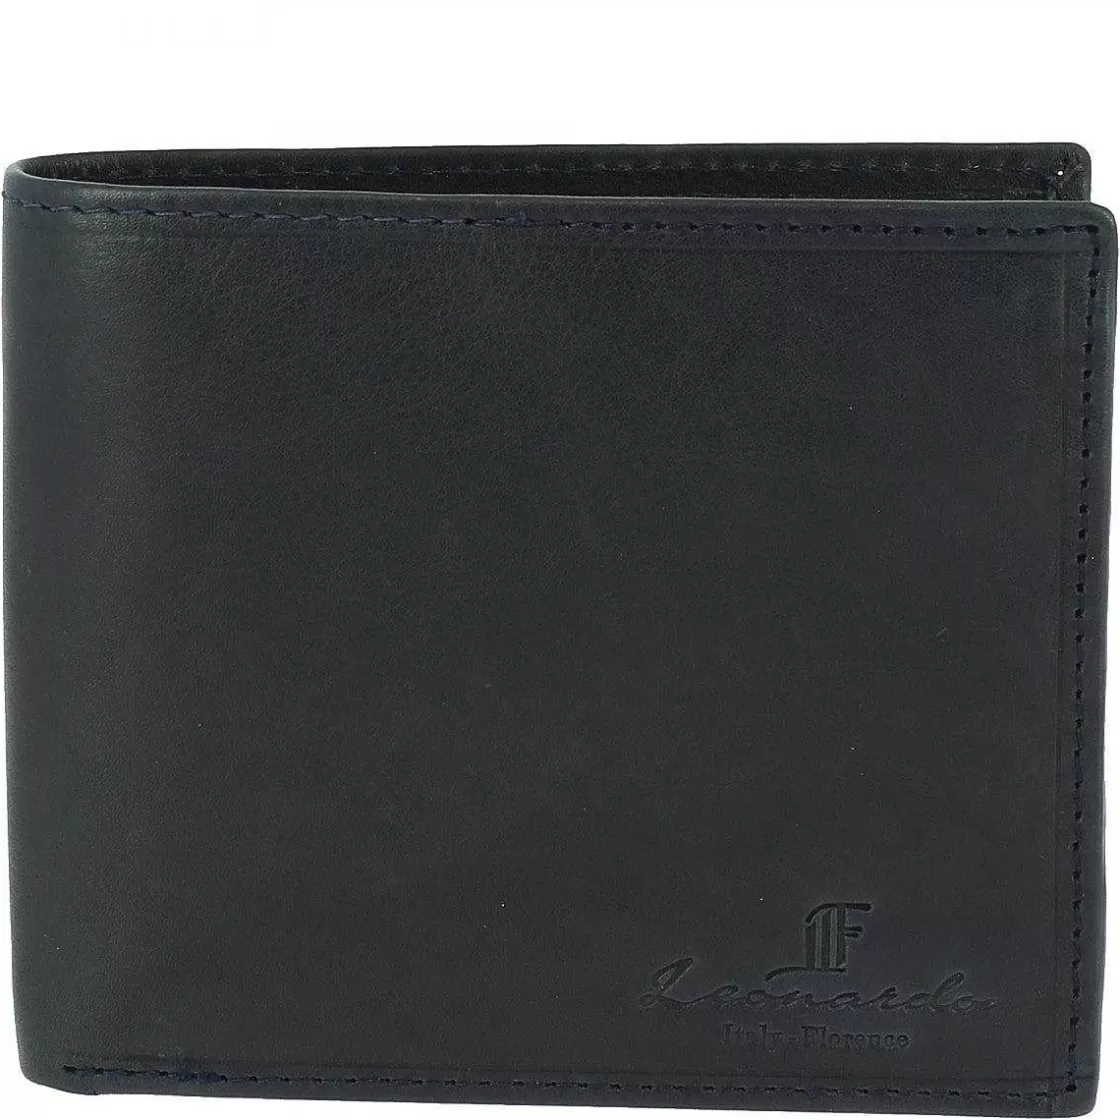 Leonardo Men'S Wallet Sauvage Leather Banknote Compartments Card Holder Clearance